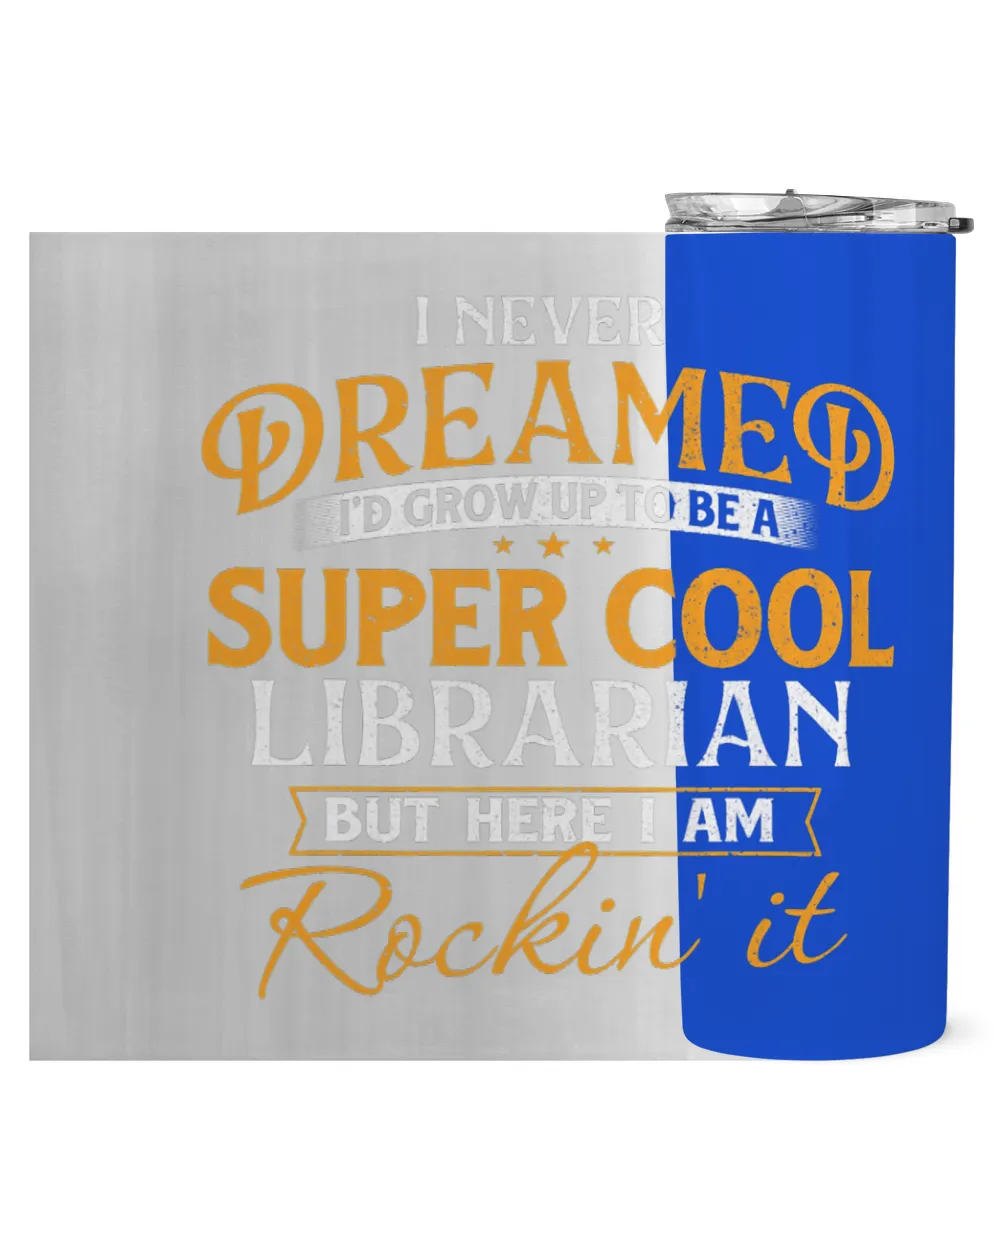 I Never Dreamed To Be A Cool Librarian 2Library Book Lover